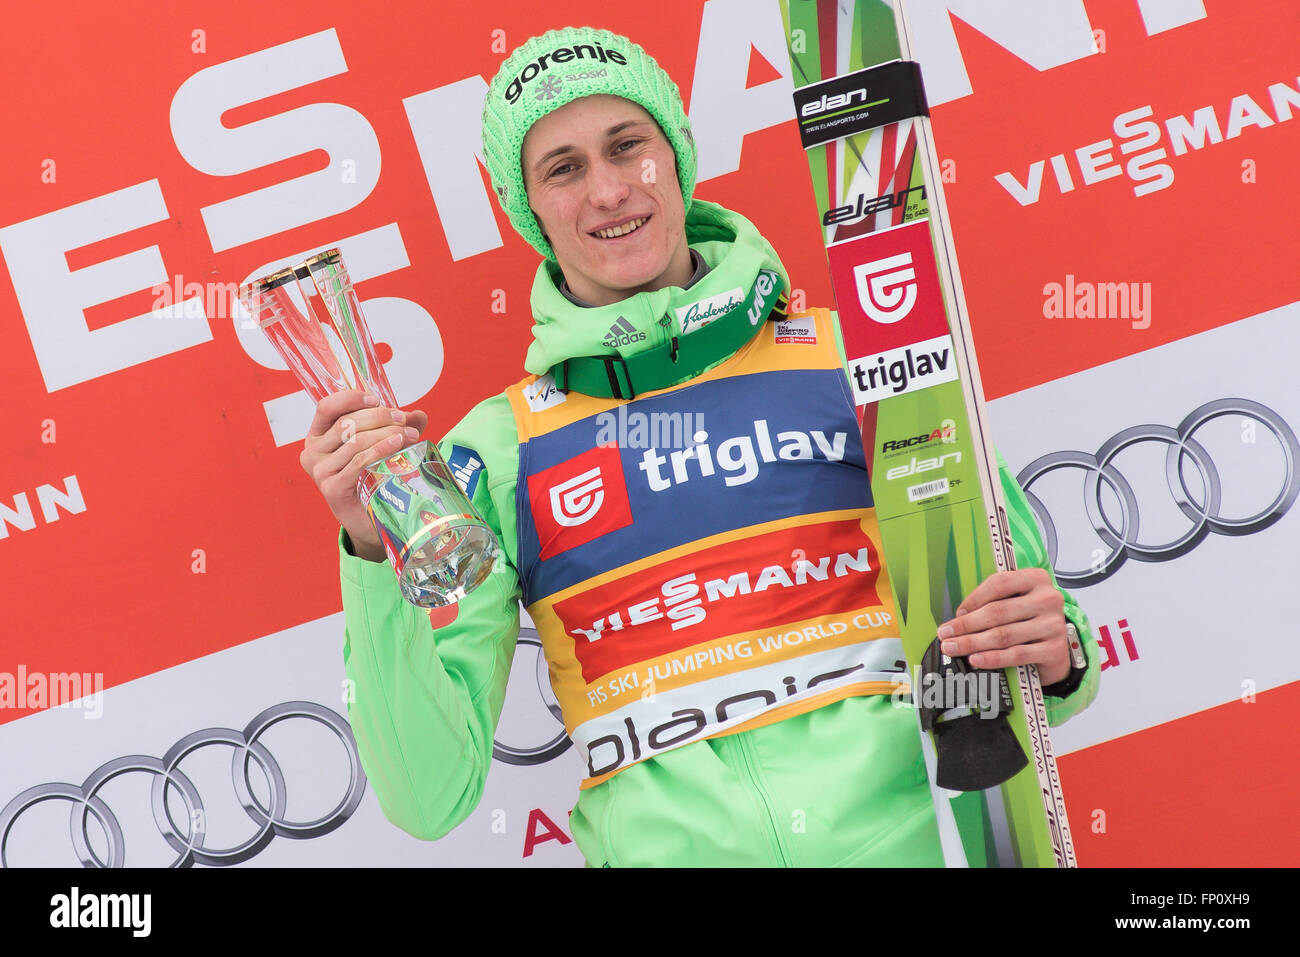 Planica, Slovenia. 17th Mar, 2016. Peter Prevc of Slovenia with trophy on podium celebrating his fist place at the Planica FIS Ski Jumping World Cup final in Planica, Slovenia on March 17, 2016. © Rok Rakun/Pacific Press/Alamy Live News Stock Photo